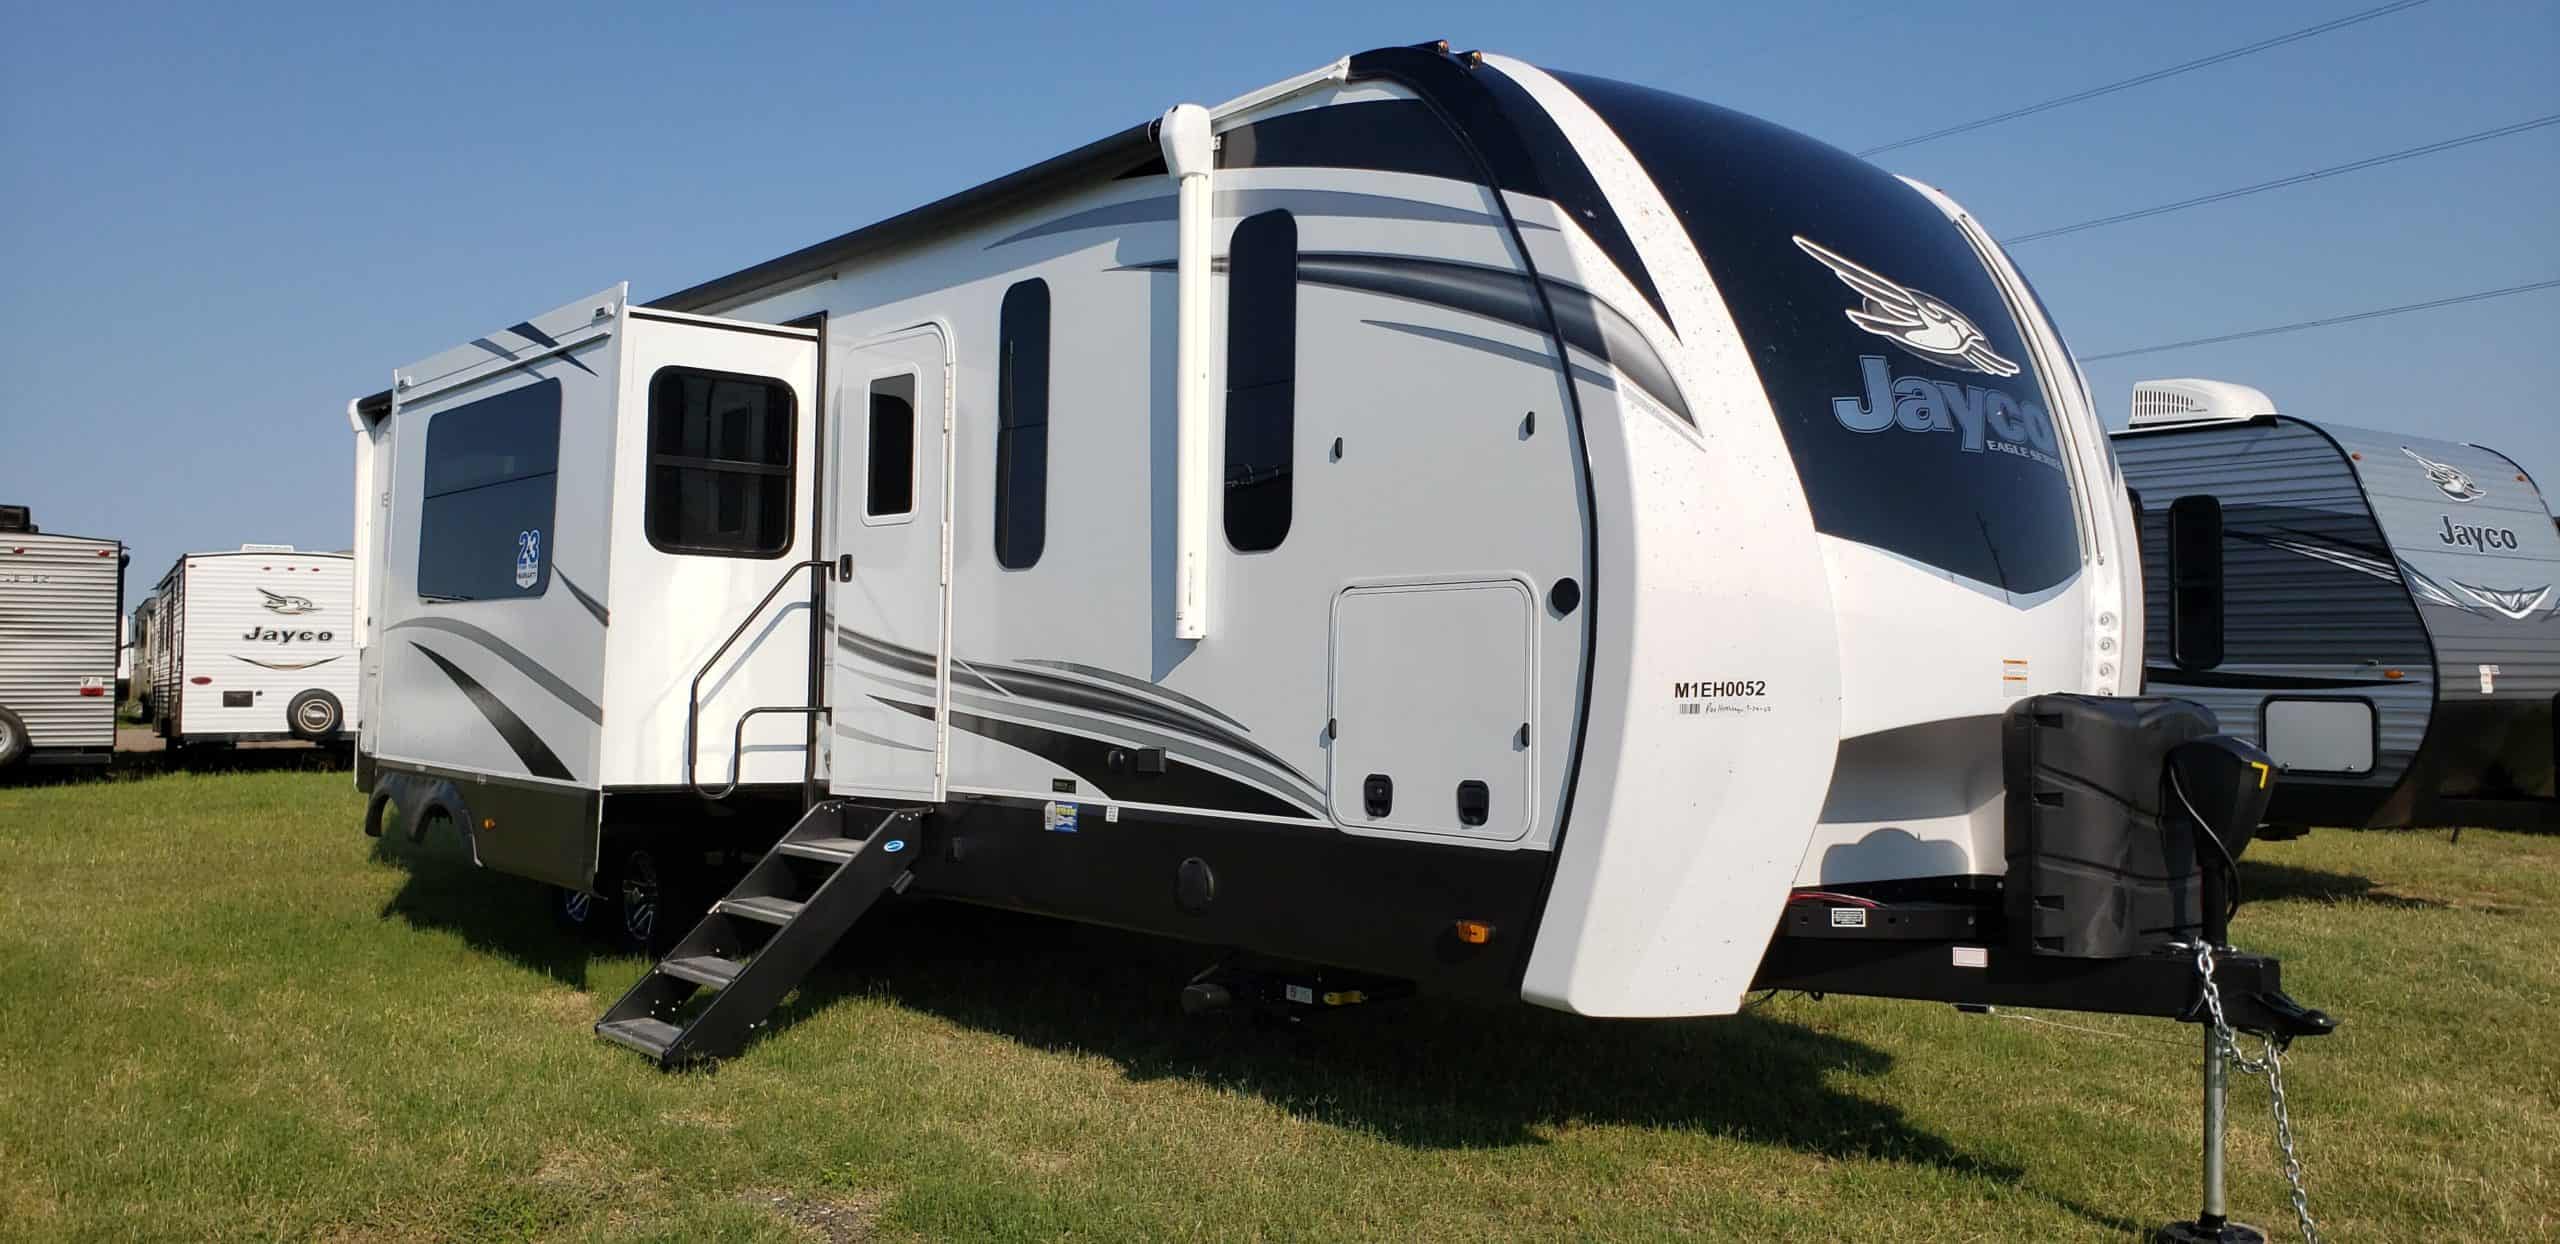 Jayco Eagle Travel Trailer Review (Updated 2021)